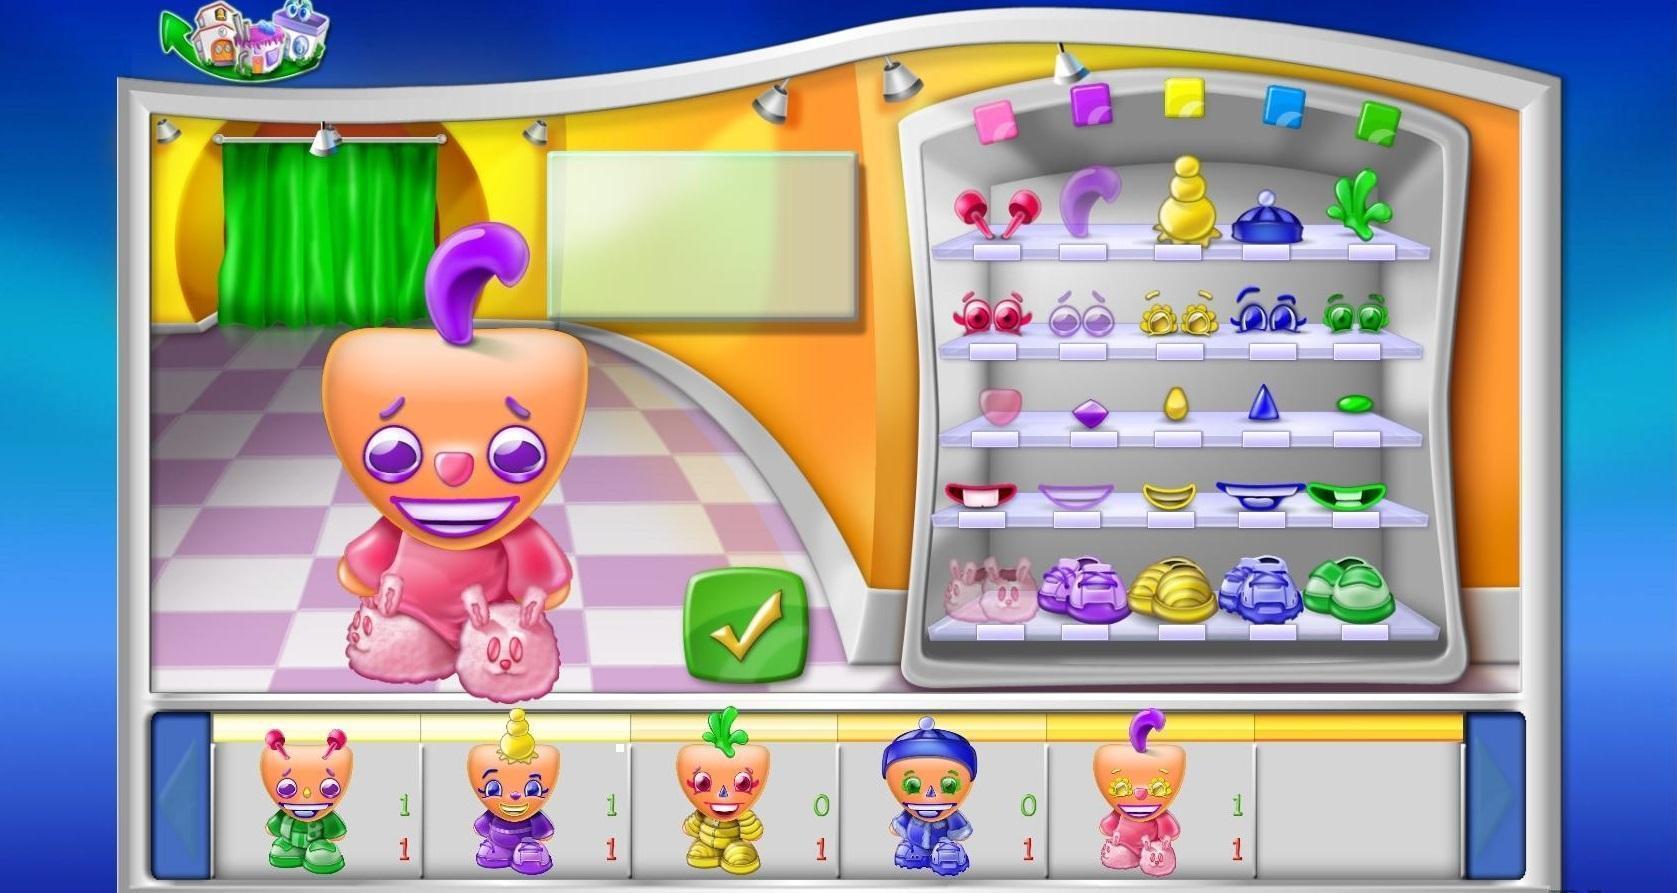 purble place download win 7